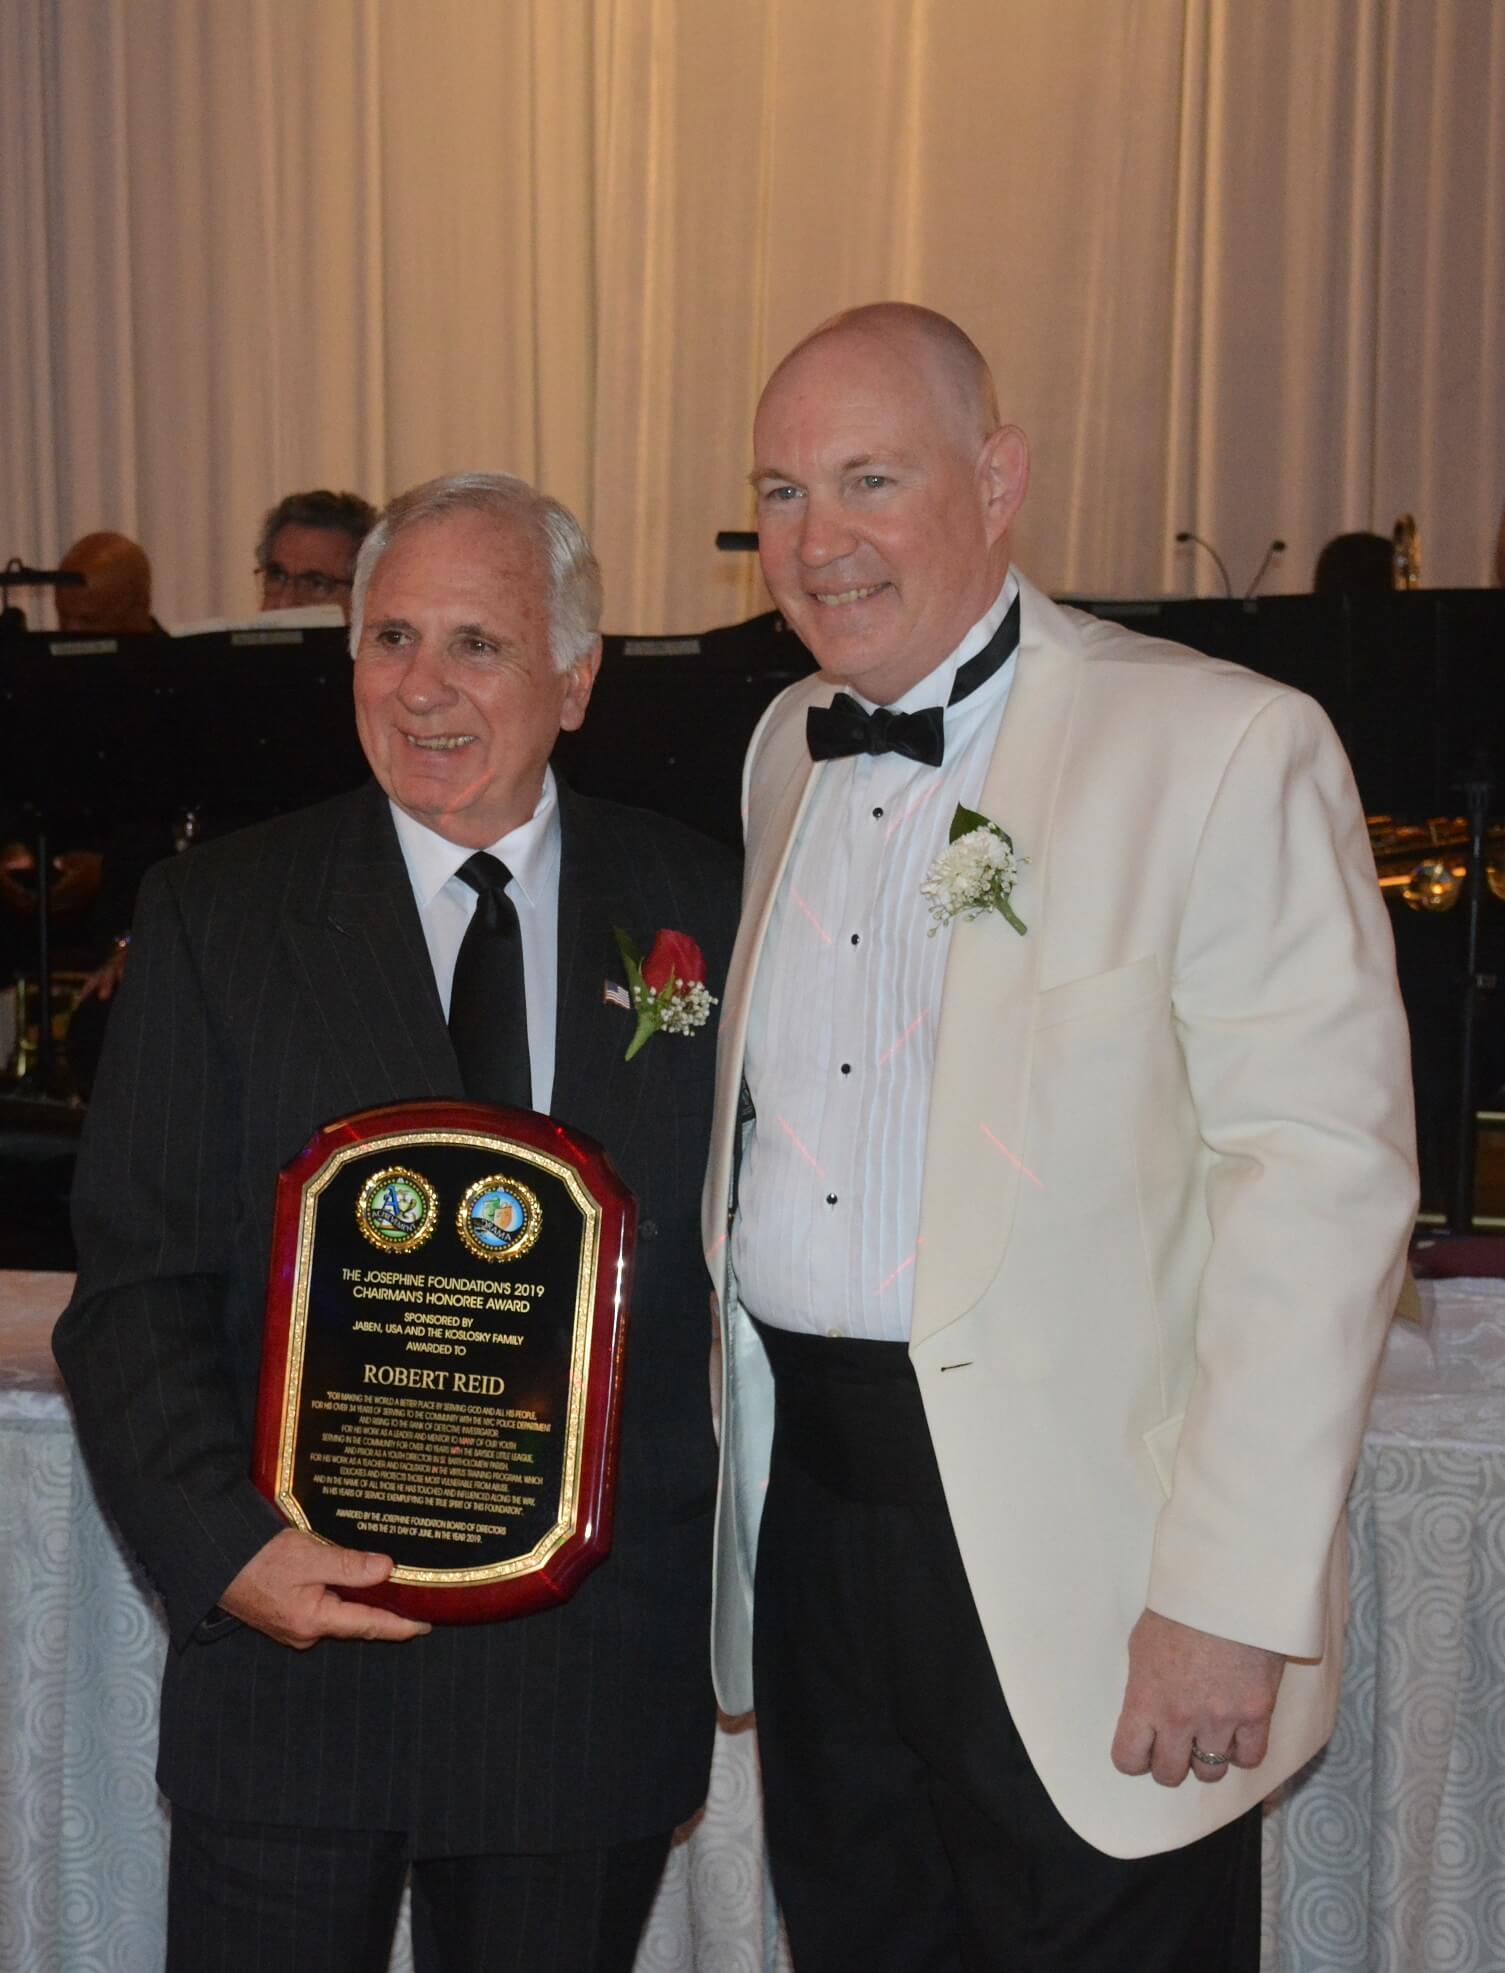 Josephine Foundation Sr. Vice President John Shea, right, with 2019 Follow Your Dreams Honoree and Bayside Little League President Robert Reid at June 21 event (Photo by Michael Rizzo)